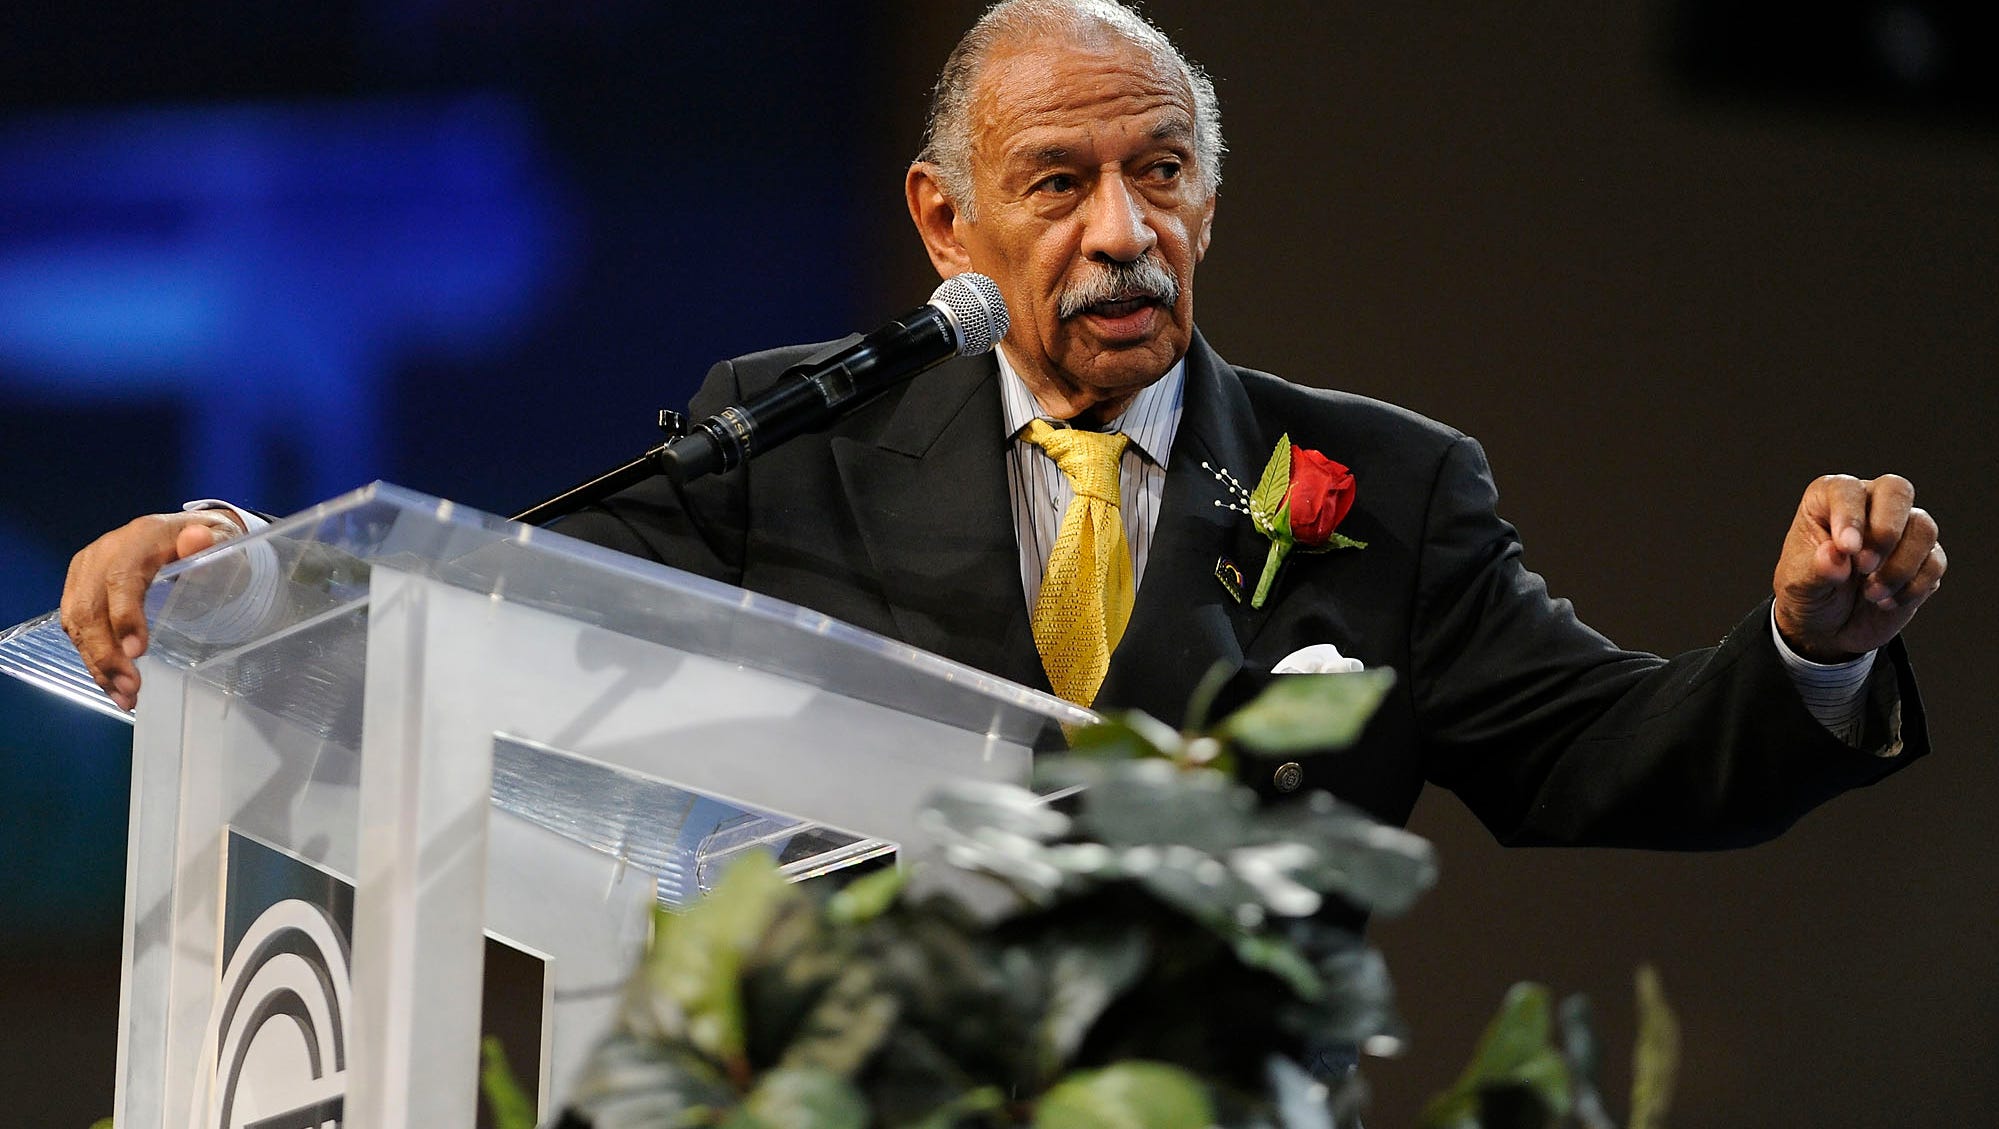 Conyers addresses attendees of his 2013 tribute at Greater Grace Temple Church about taking the message of his legacy — jobs, justice and peace — further. By this time, after the 2012 redistricting, Conyers was representing Michigan's 13th District, comprised of parts of Detroit and its suburbs.